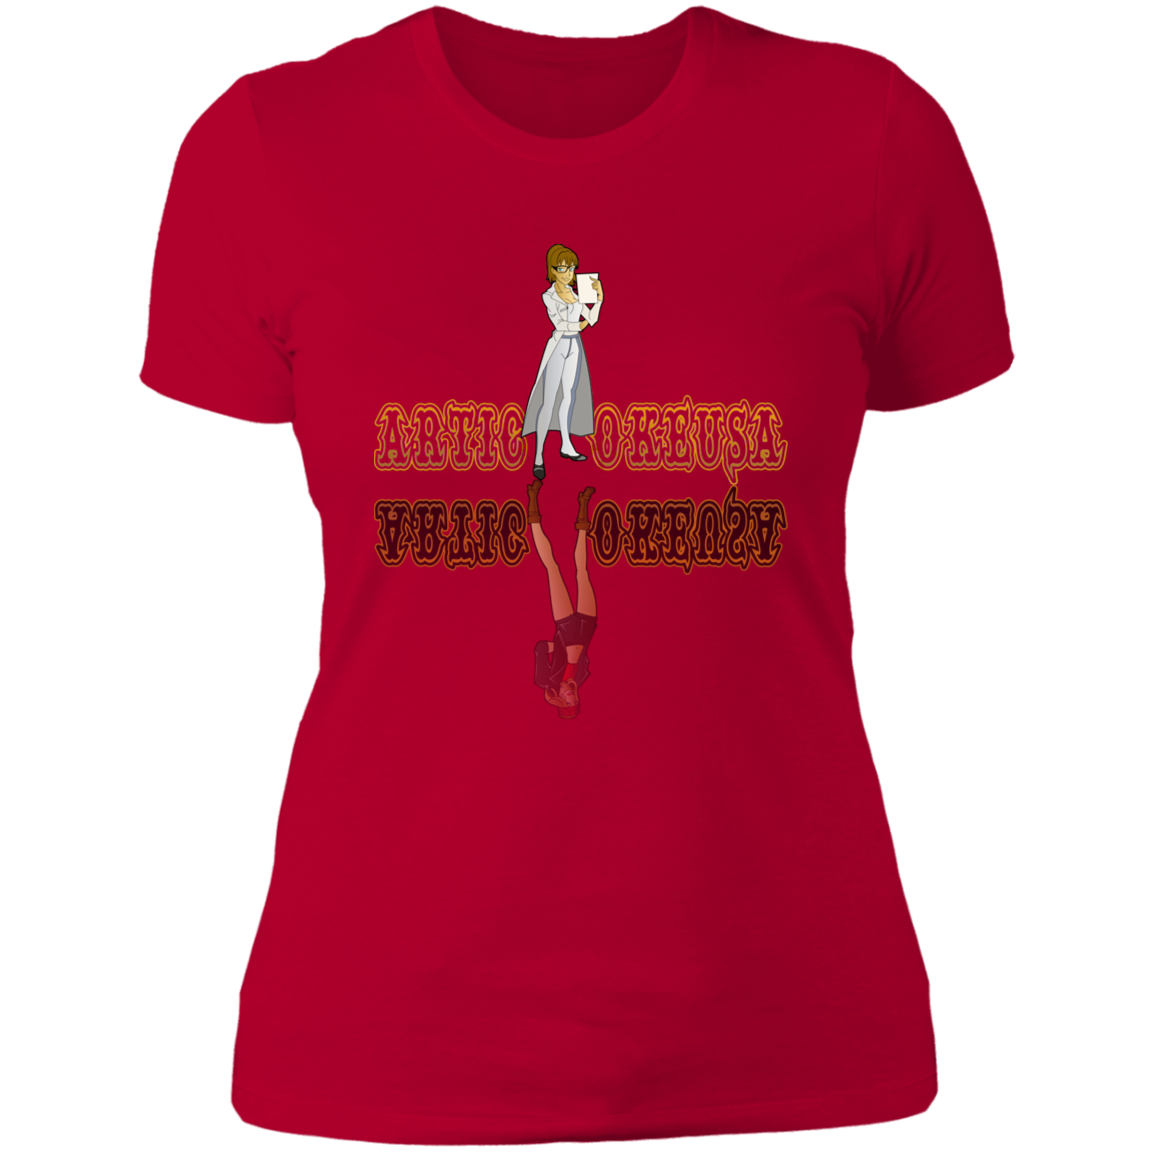 ArtichokeUSA Custom Design. Façade: (Noun) A false appearance that makes someone or something seem more pleasant or better than they really are.  Ladies' Boyfriend T-Shirt